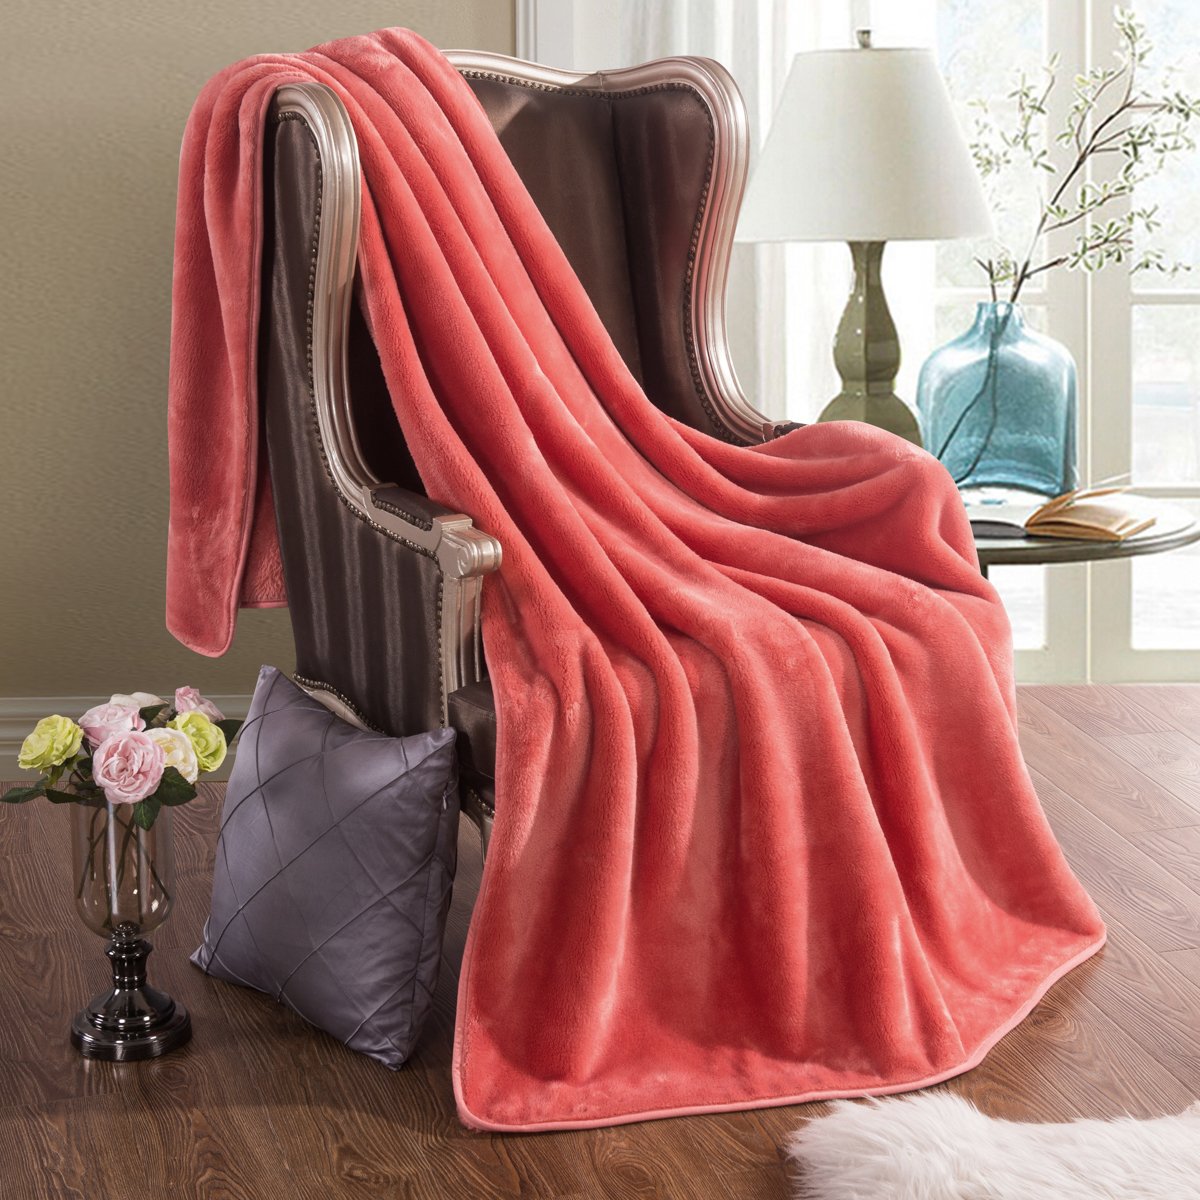 Hyseas Heavy and Thick Blanket, Extra Soft and Plush Bed Blanket (Coral, Queen, 90 x 90 in)